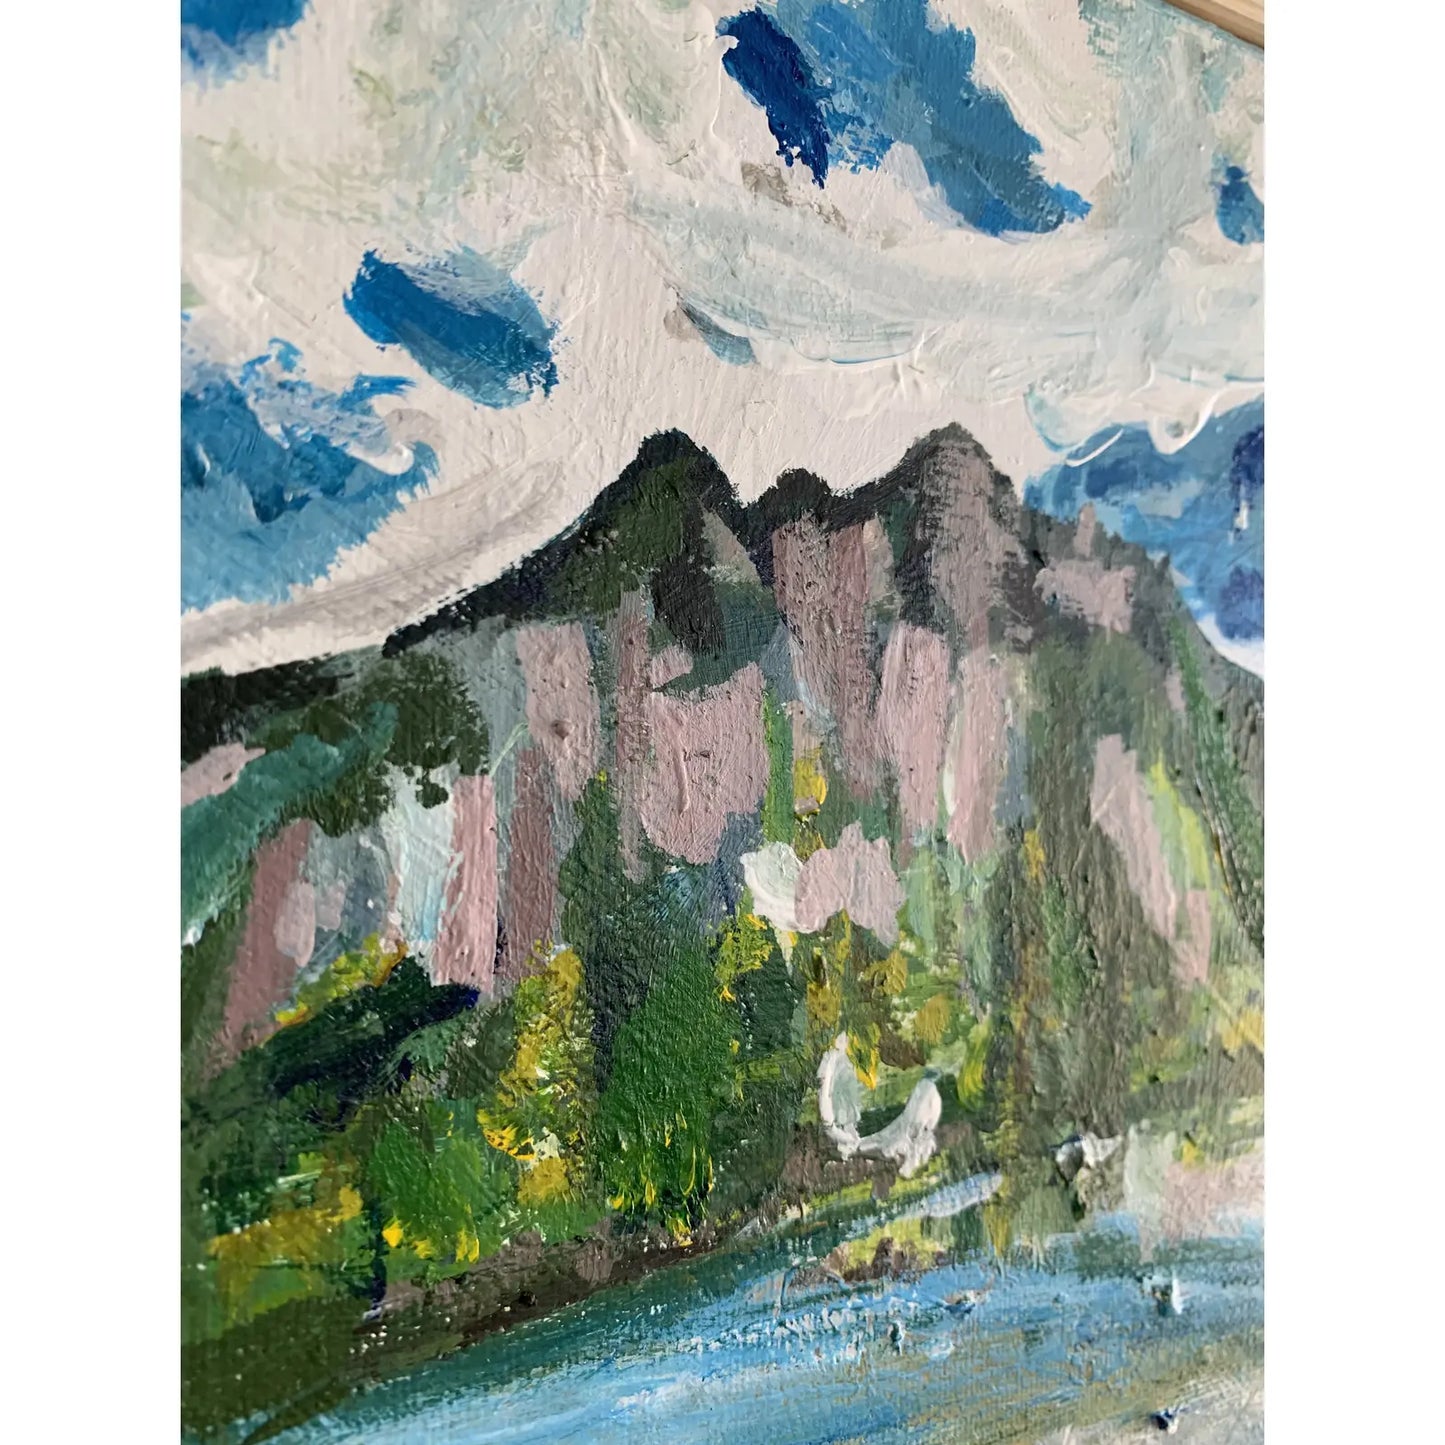 Framed Contemporary Post-Impressionist Style Landscape - Mount Si